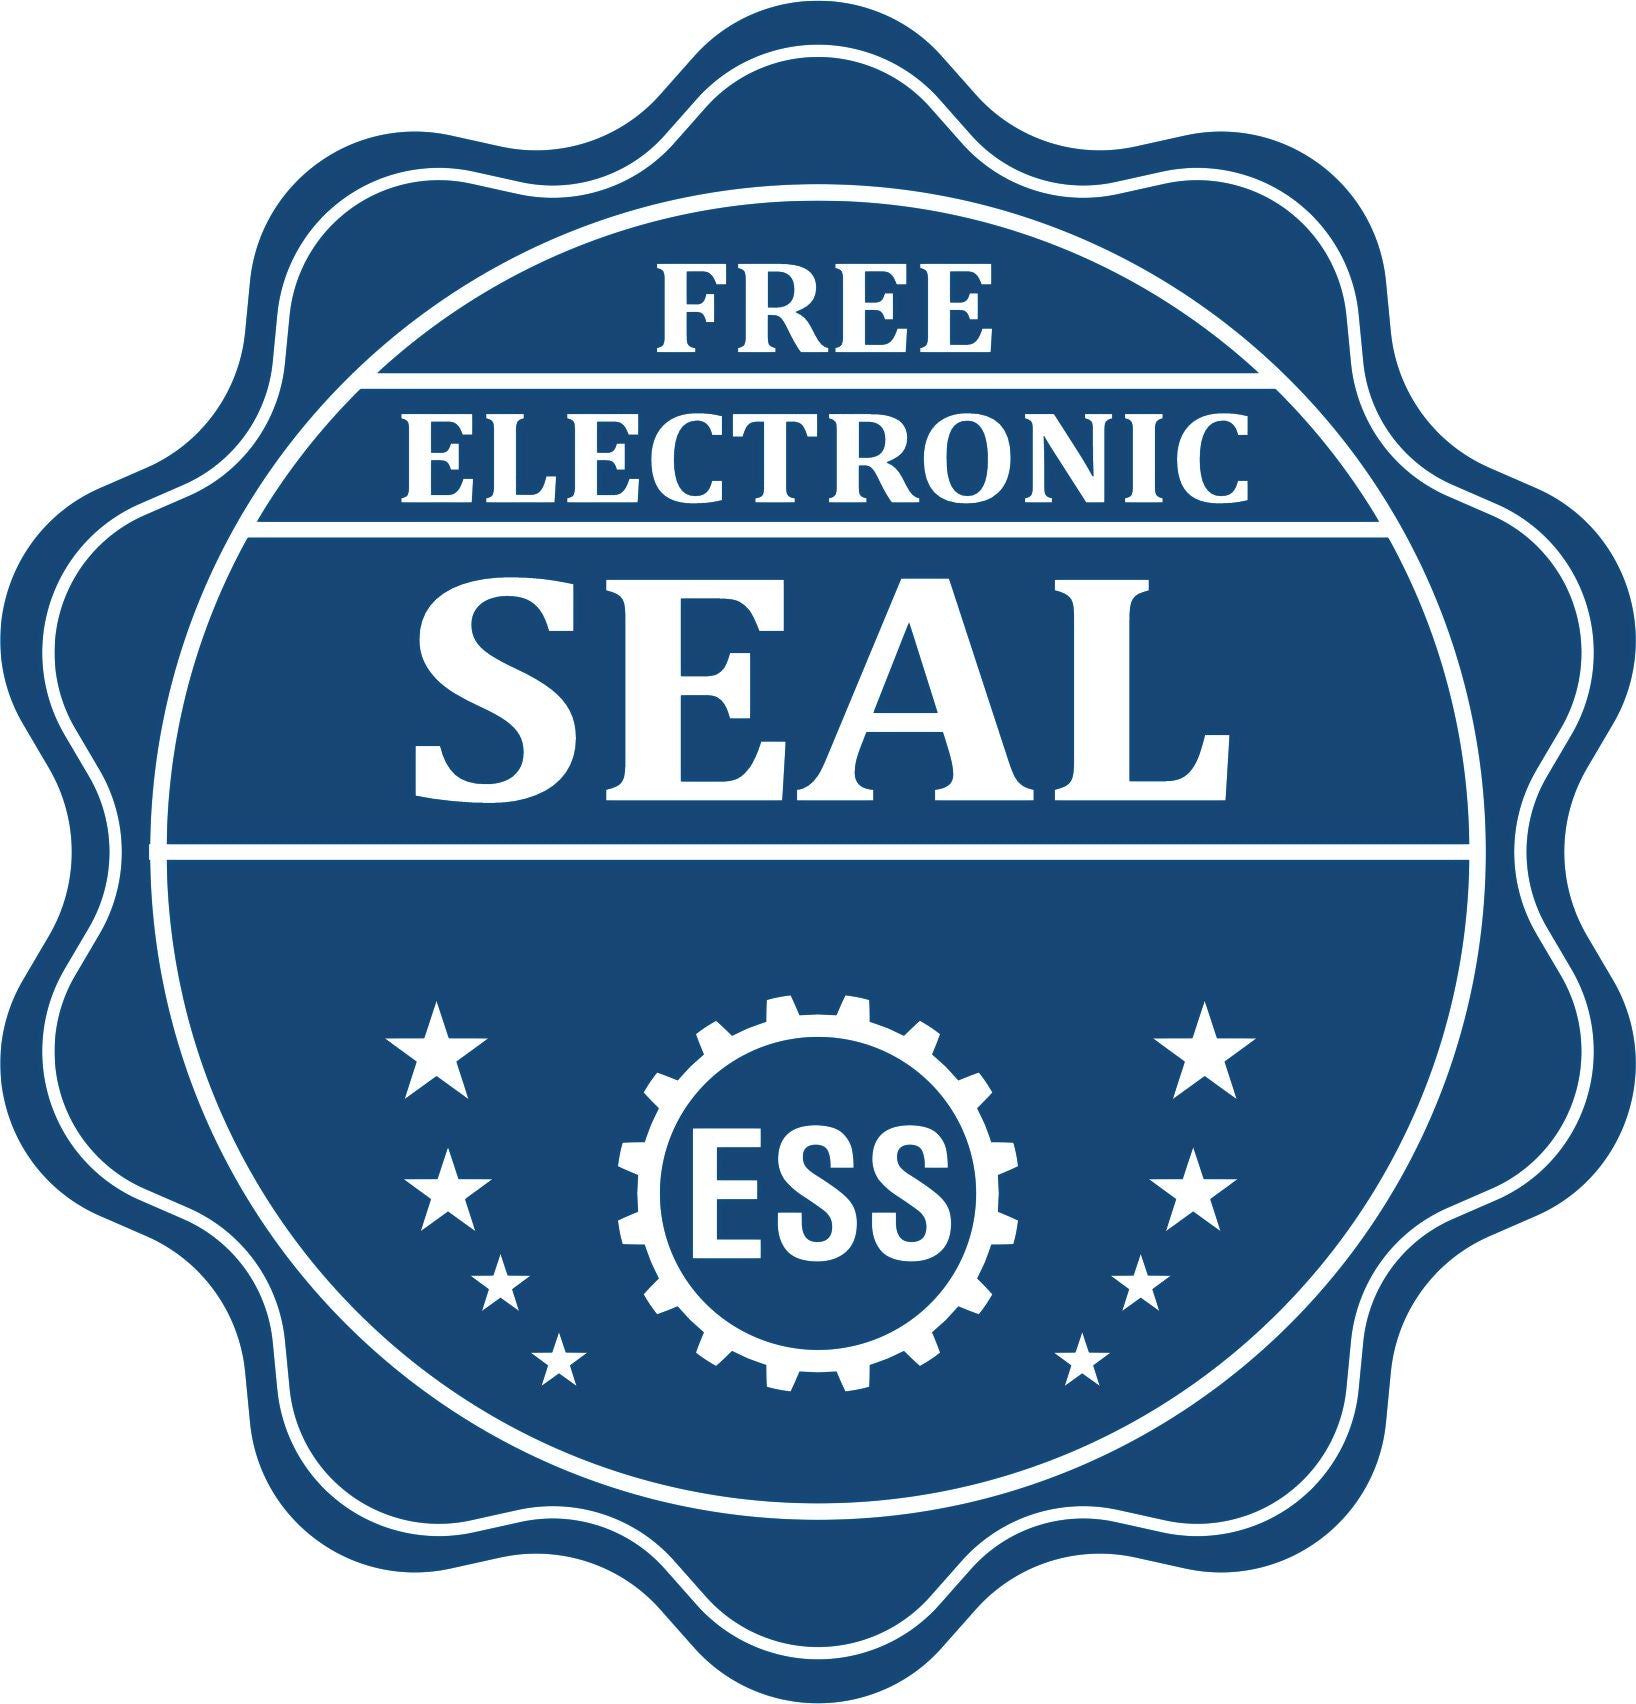 A badge showing a free electronic seal for the Hybrid Texas Landscape Architect Seal with stars and the ESS gear on the emblem.